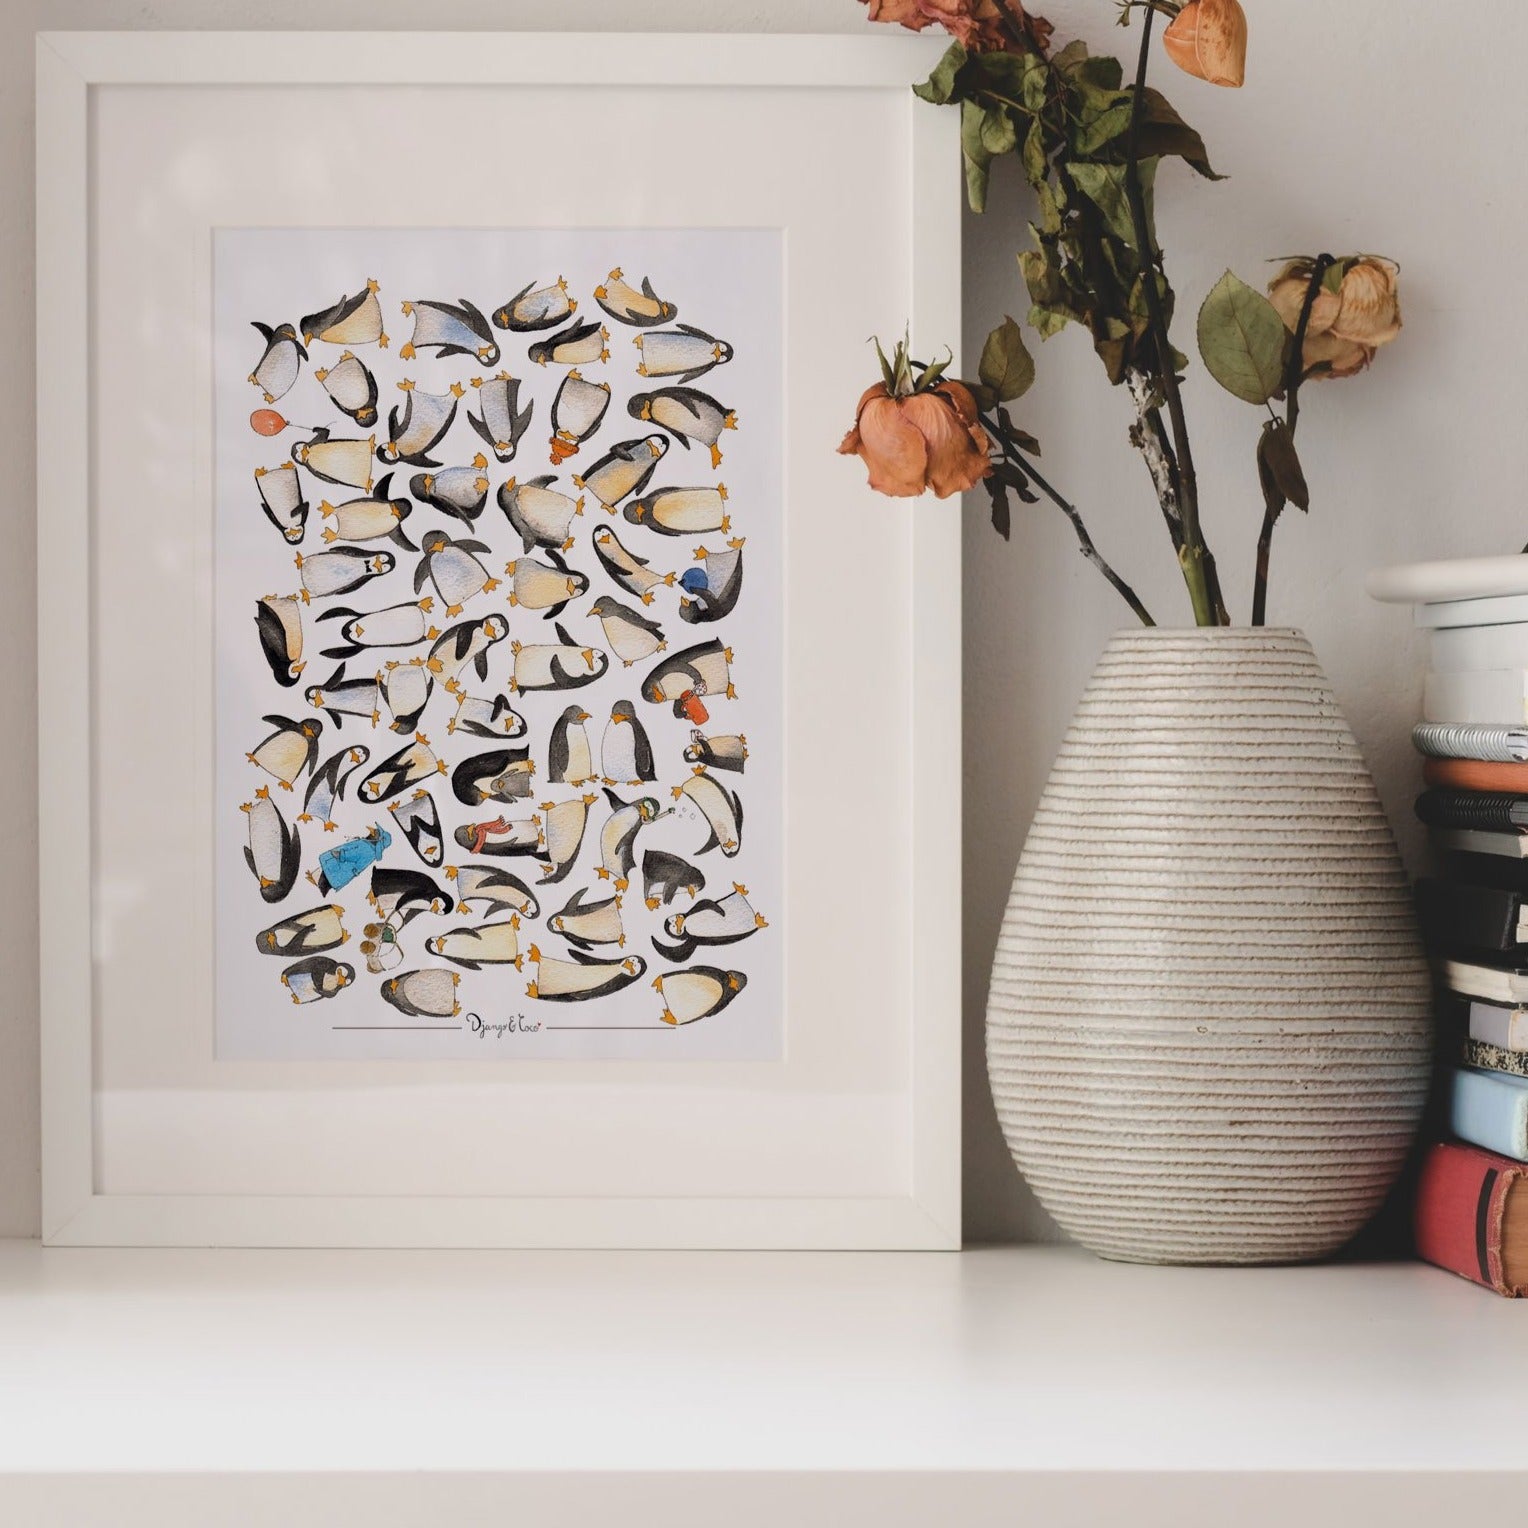 Penguins watercolor art on a shelf with a vase